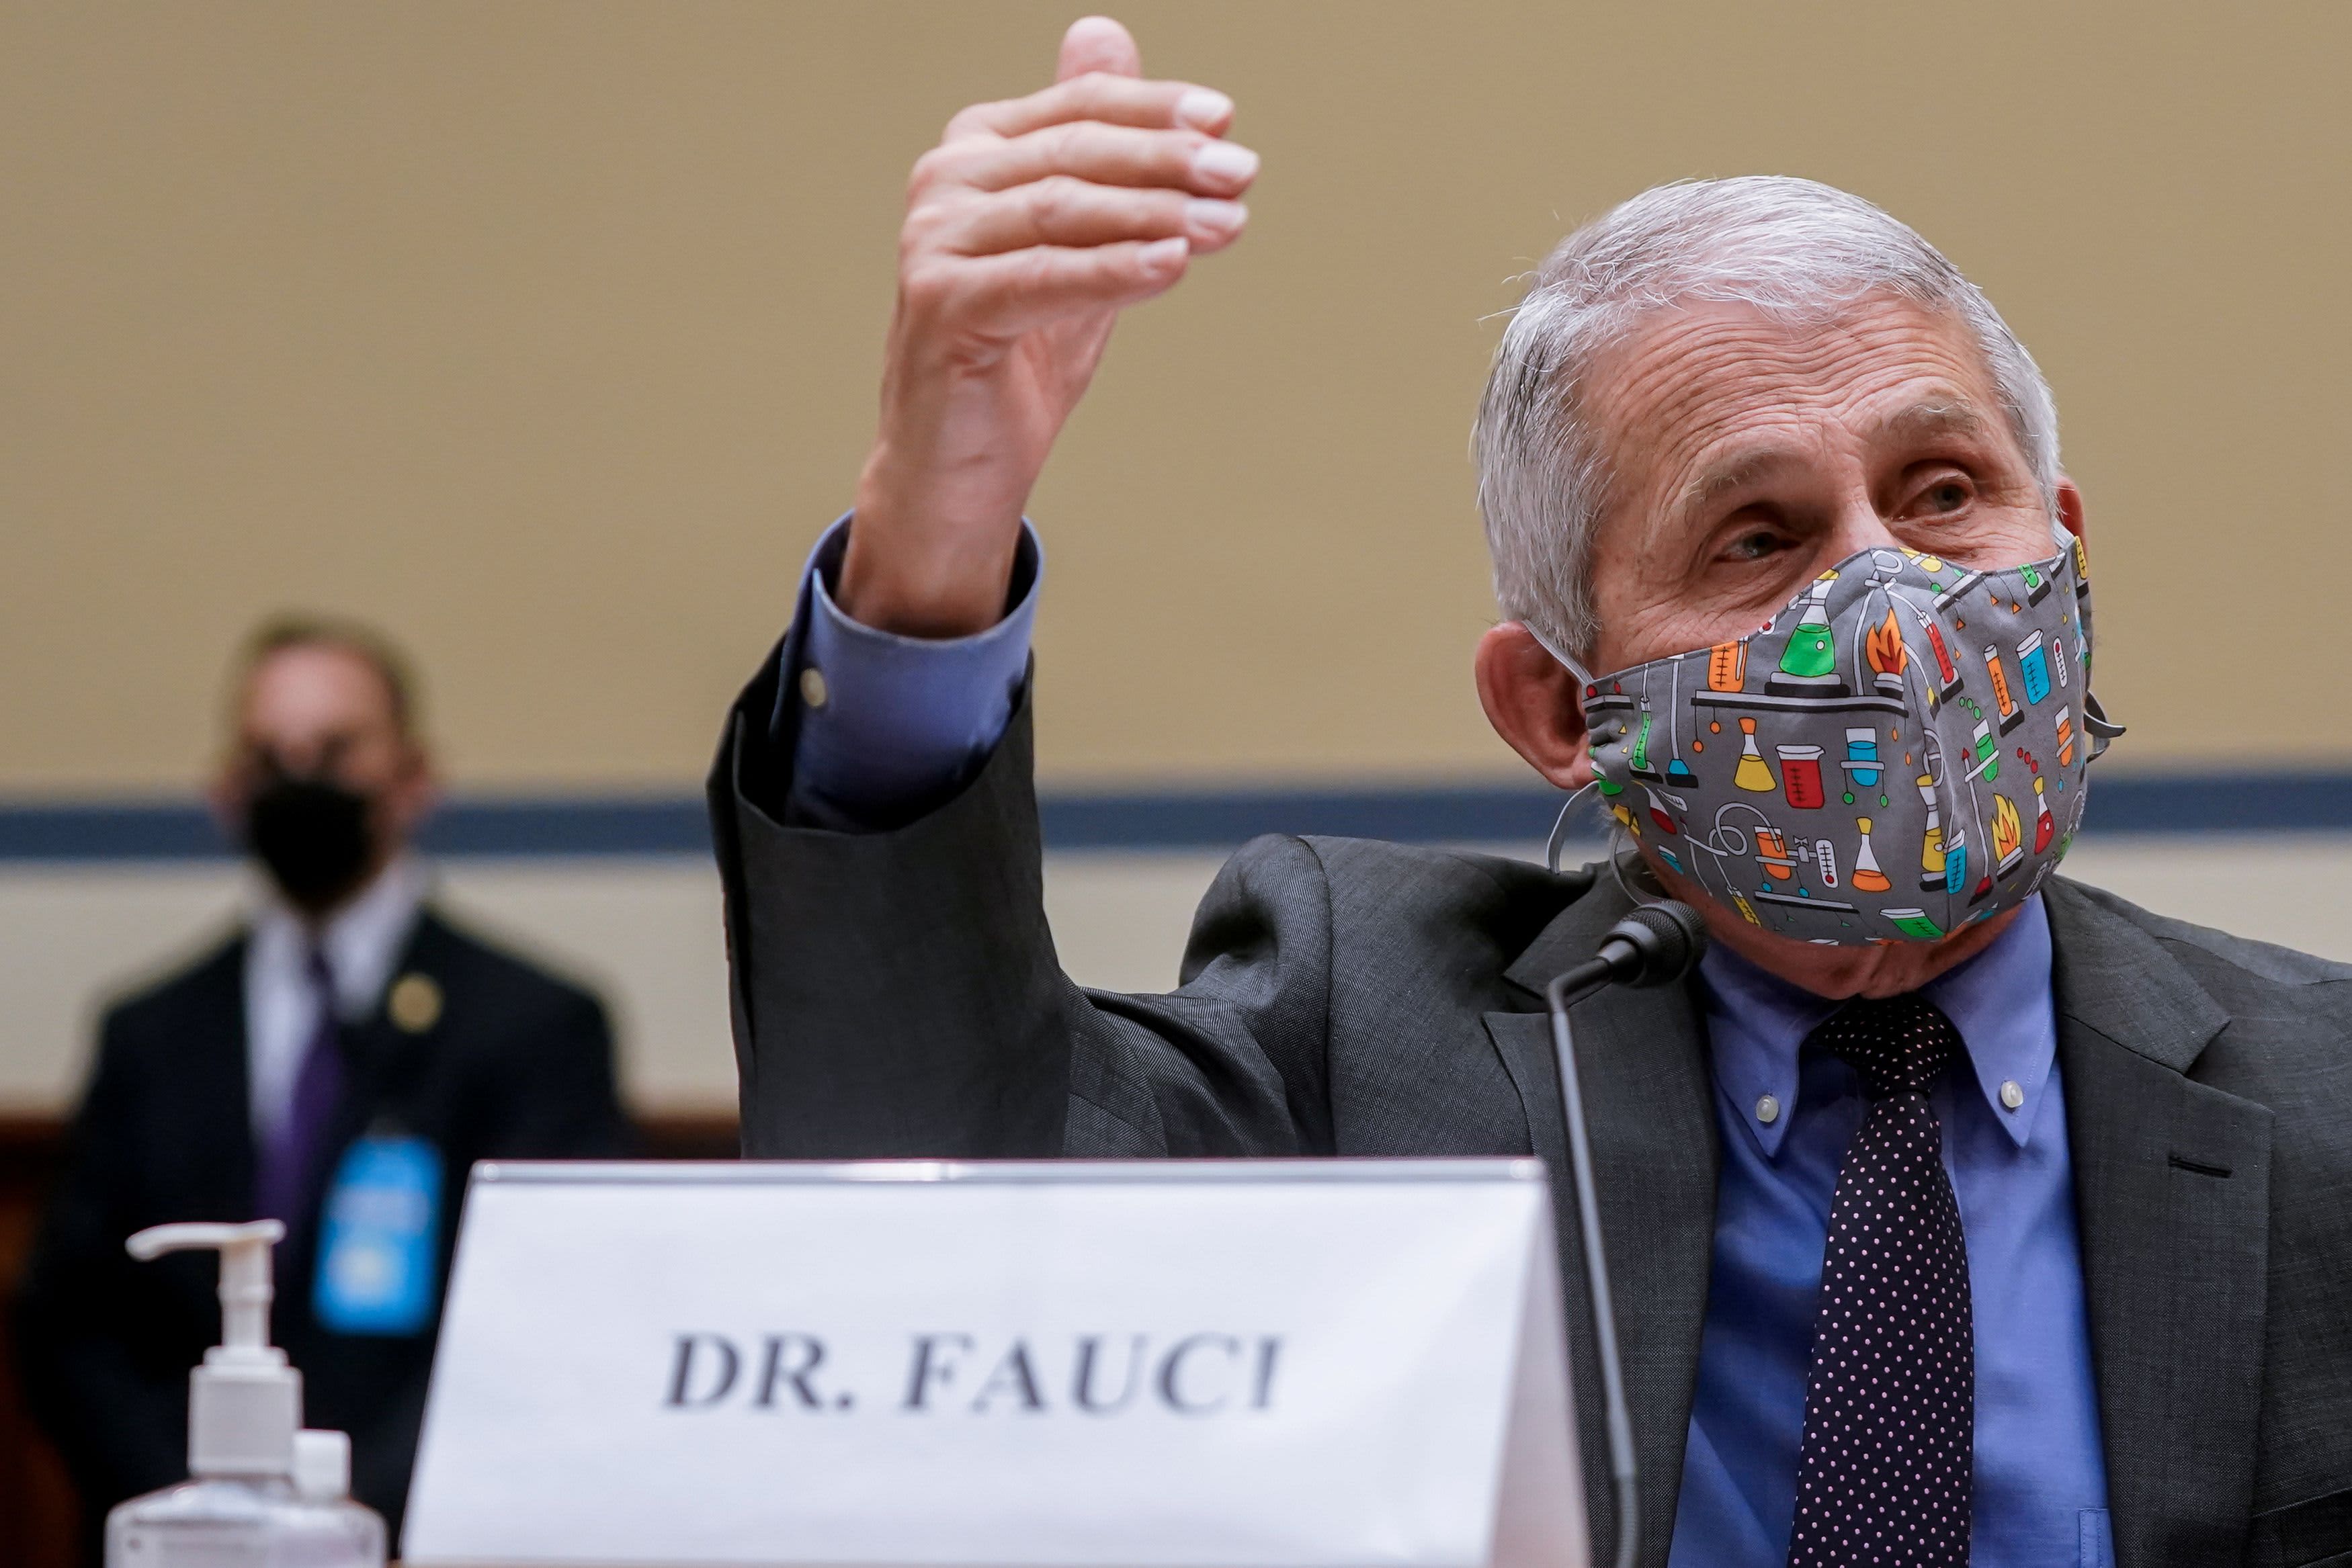 Fauci says it's 'disturbing' that some people won't take Covid vaccine because of politics